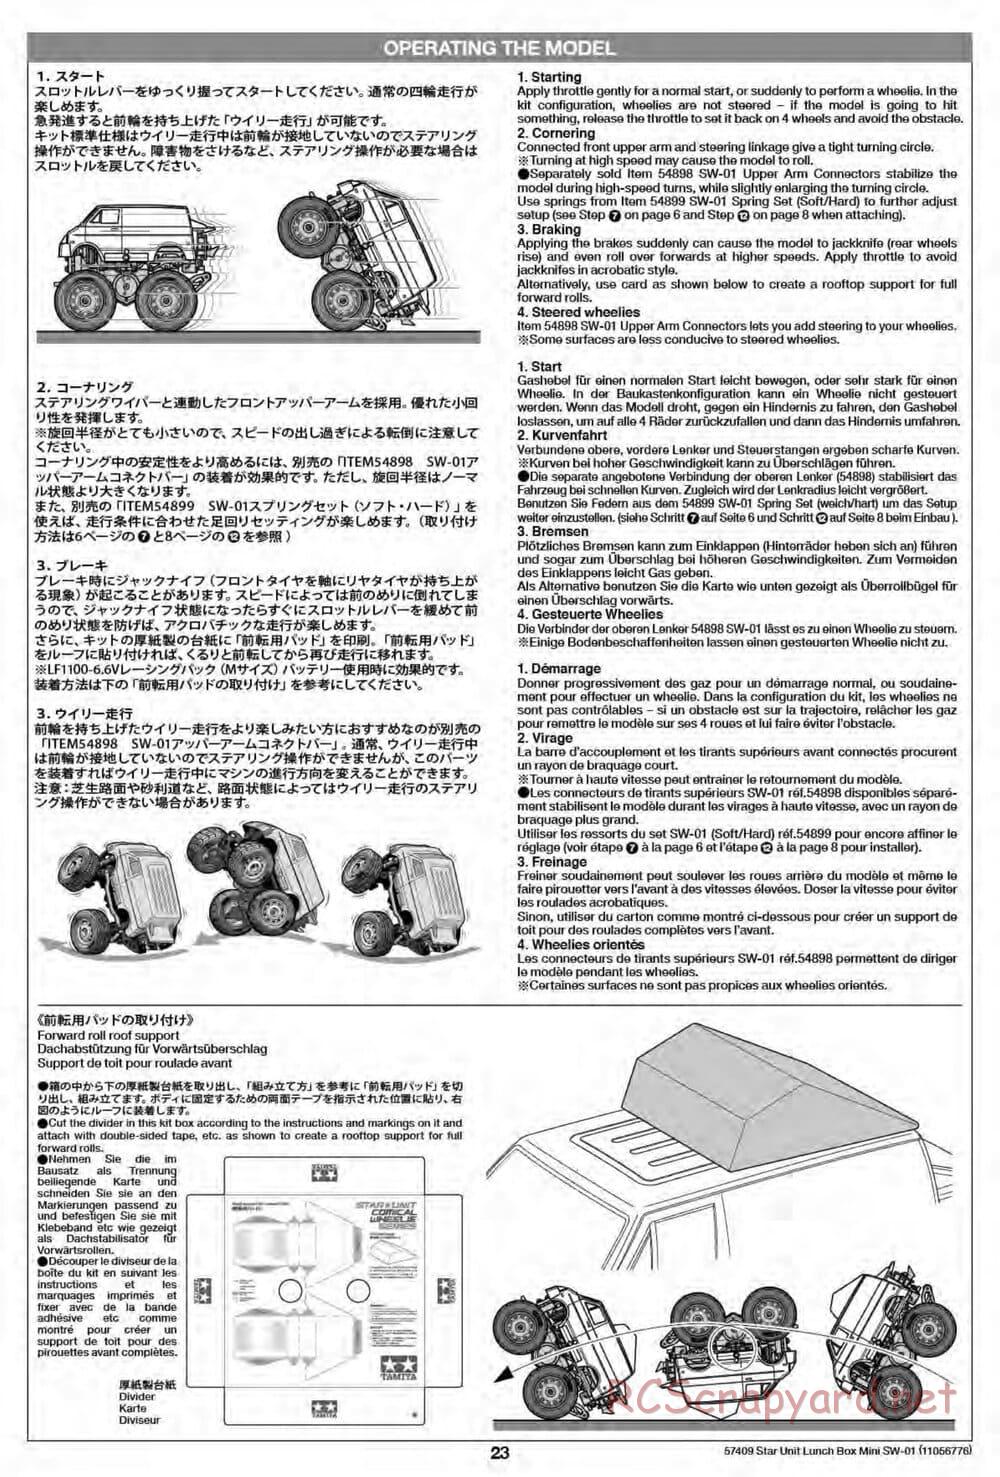 Tamiya - Lunch Box Mini - SW-01 Chassis - Manual - Page 23